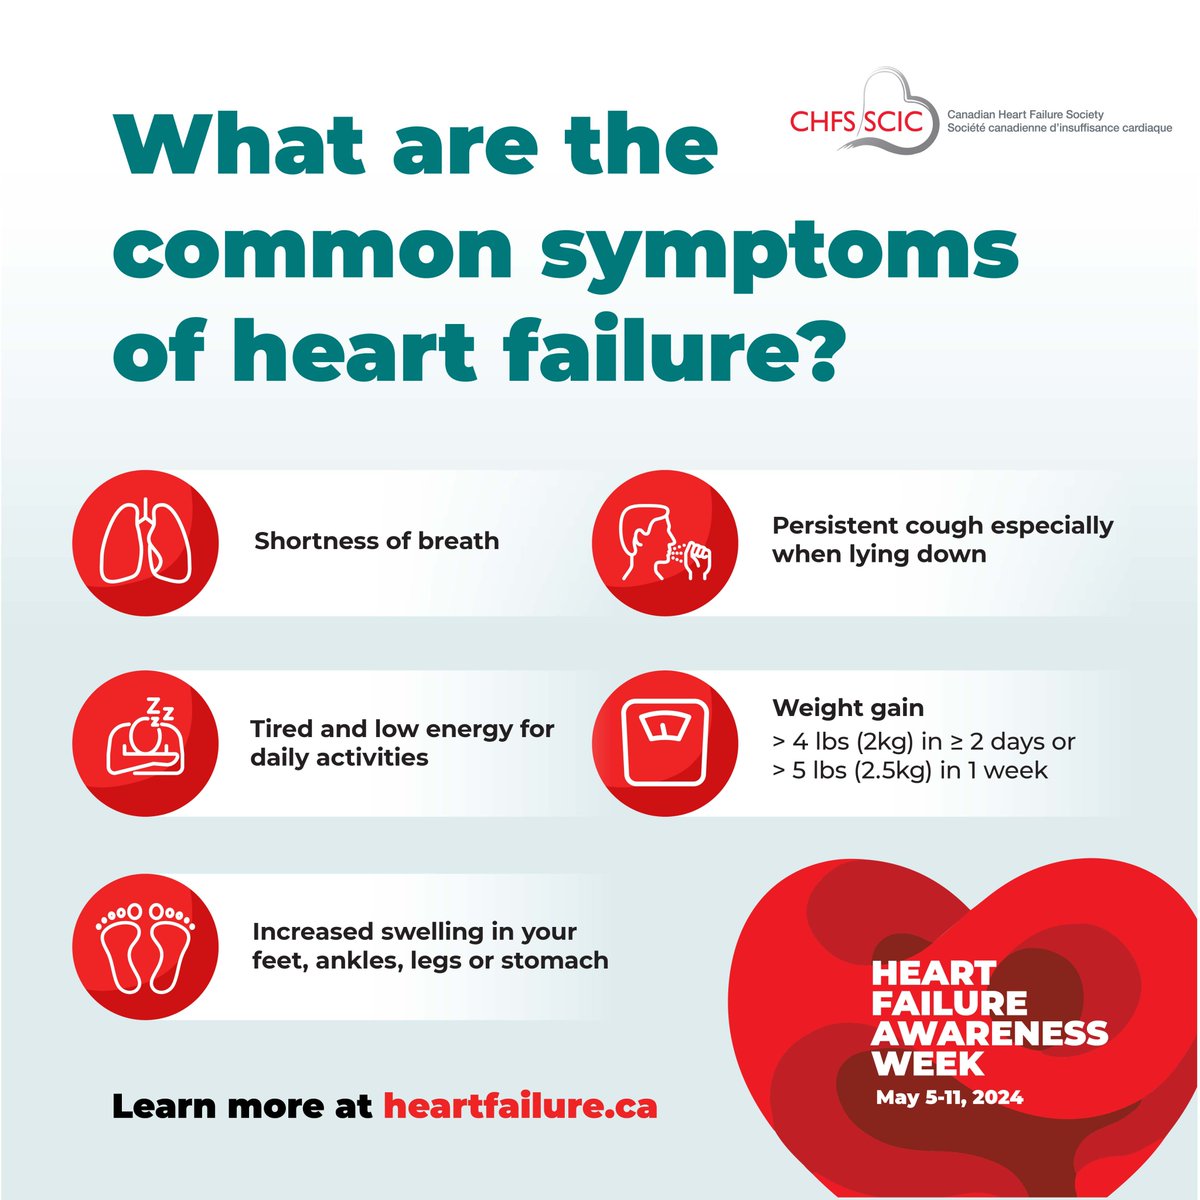 It's #HeartFailureWeekCan! We've teamed up with the Canadian Heart Failure Society and others to raise awareness about #heartfailure. Would your patients recognize the signs? Visit heartfailure.ca for tools and resources to help spread the word!